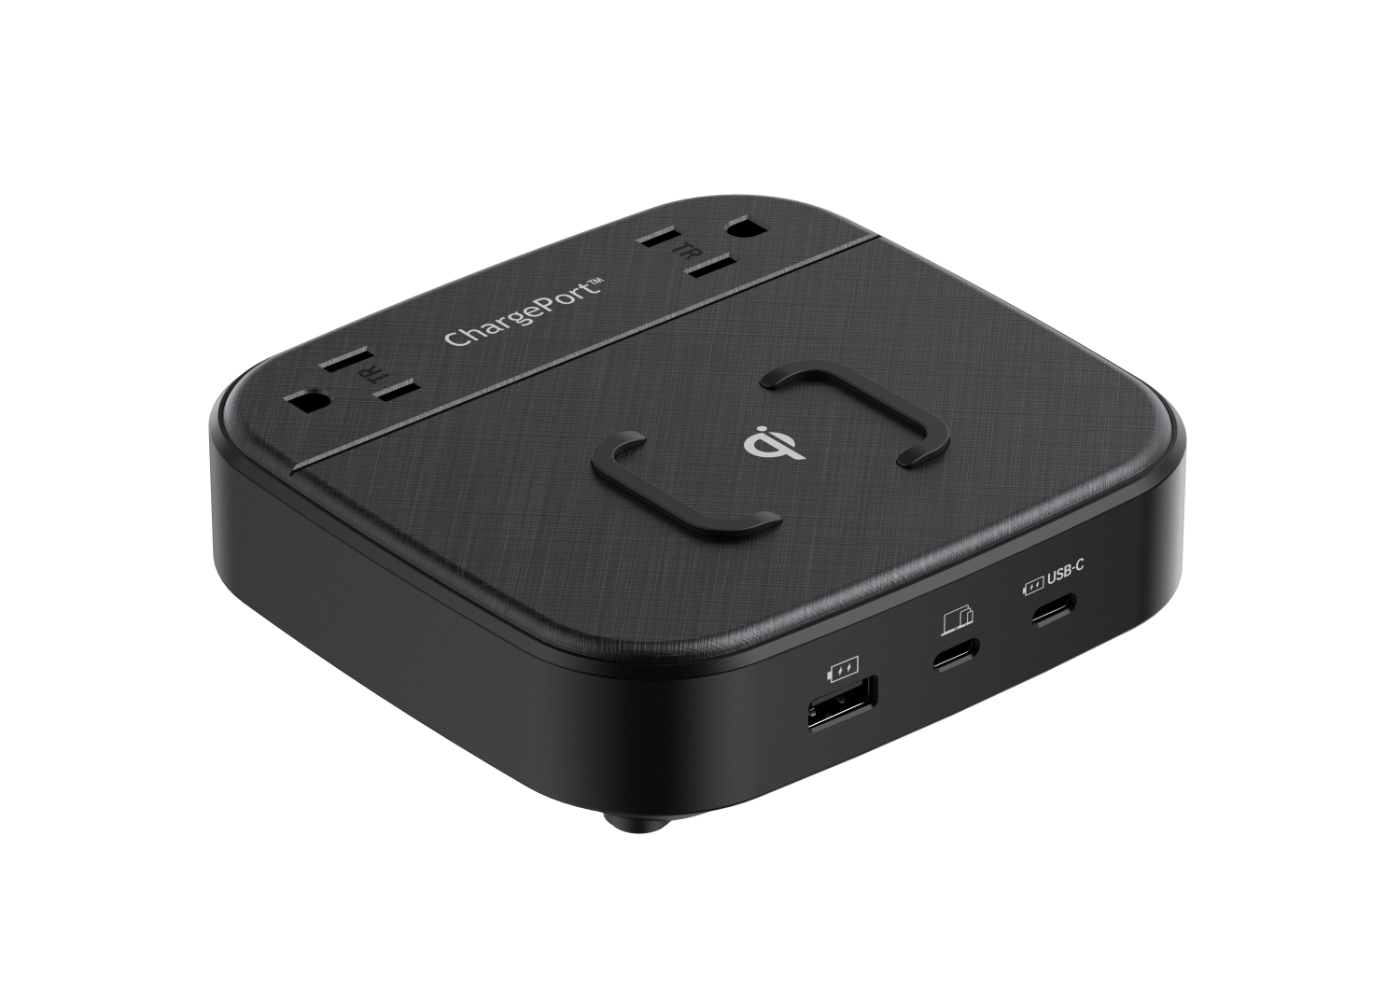 ChargePort Pro